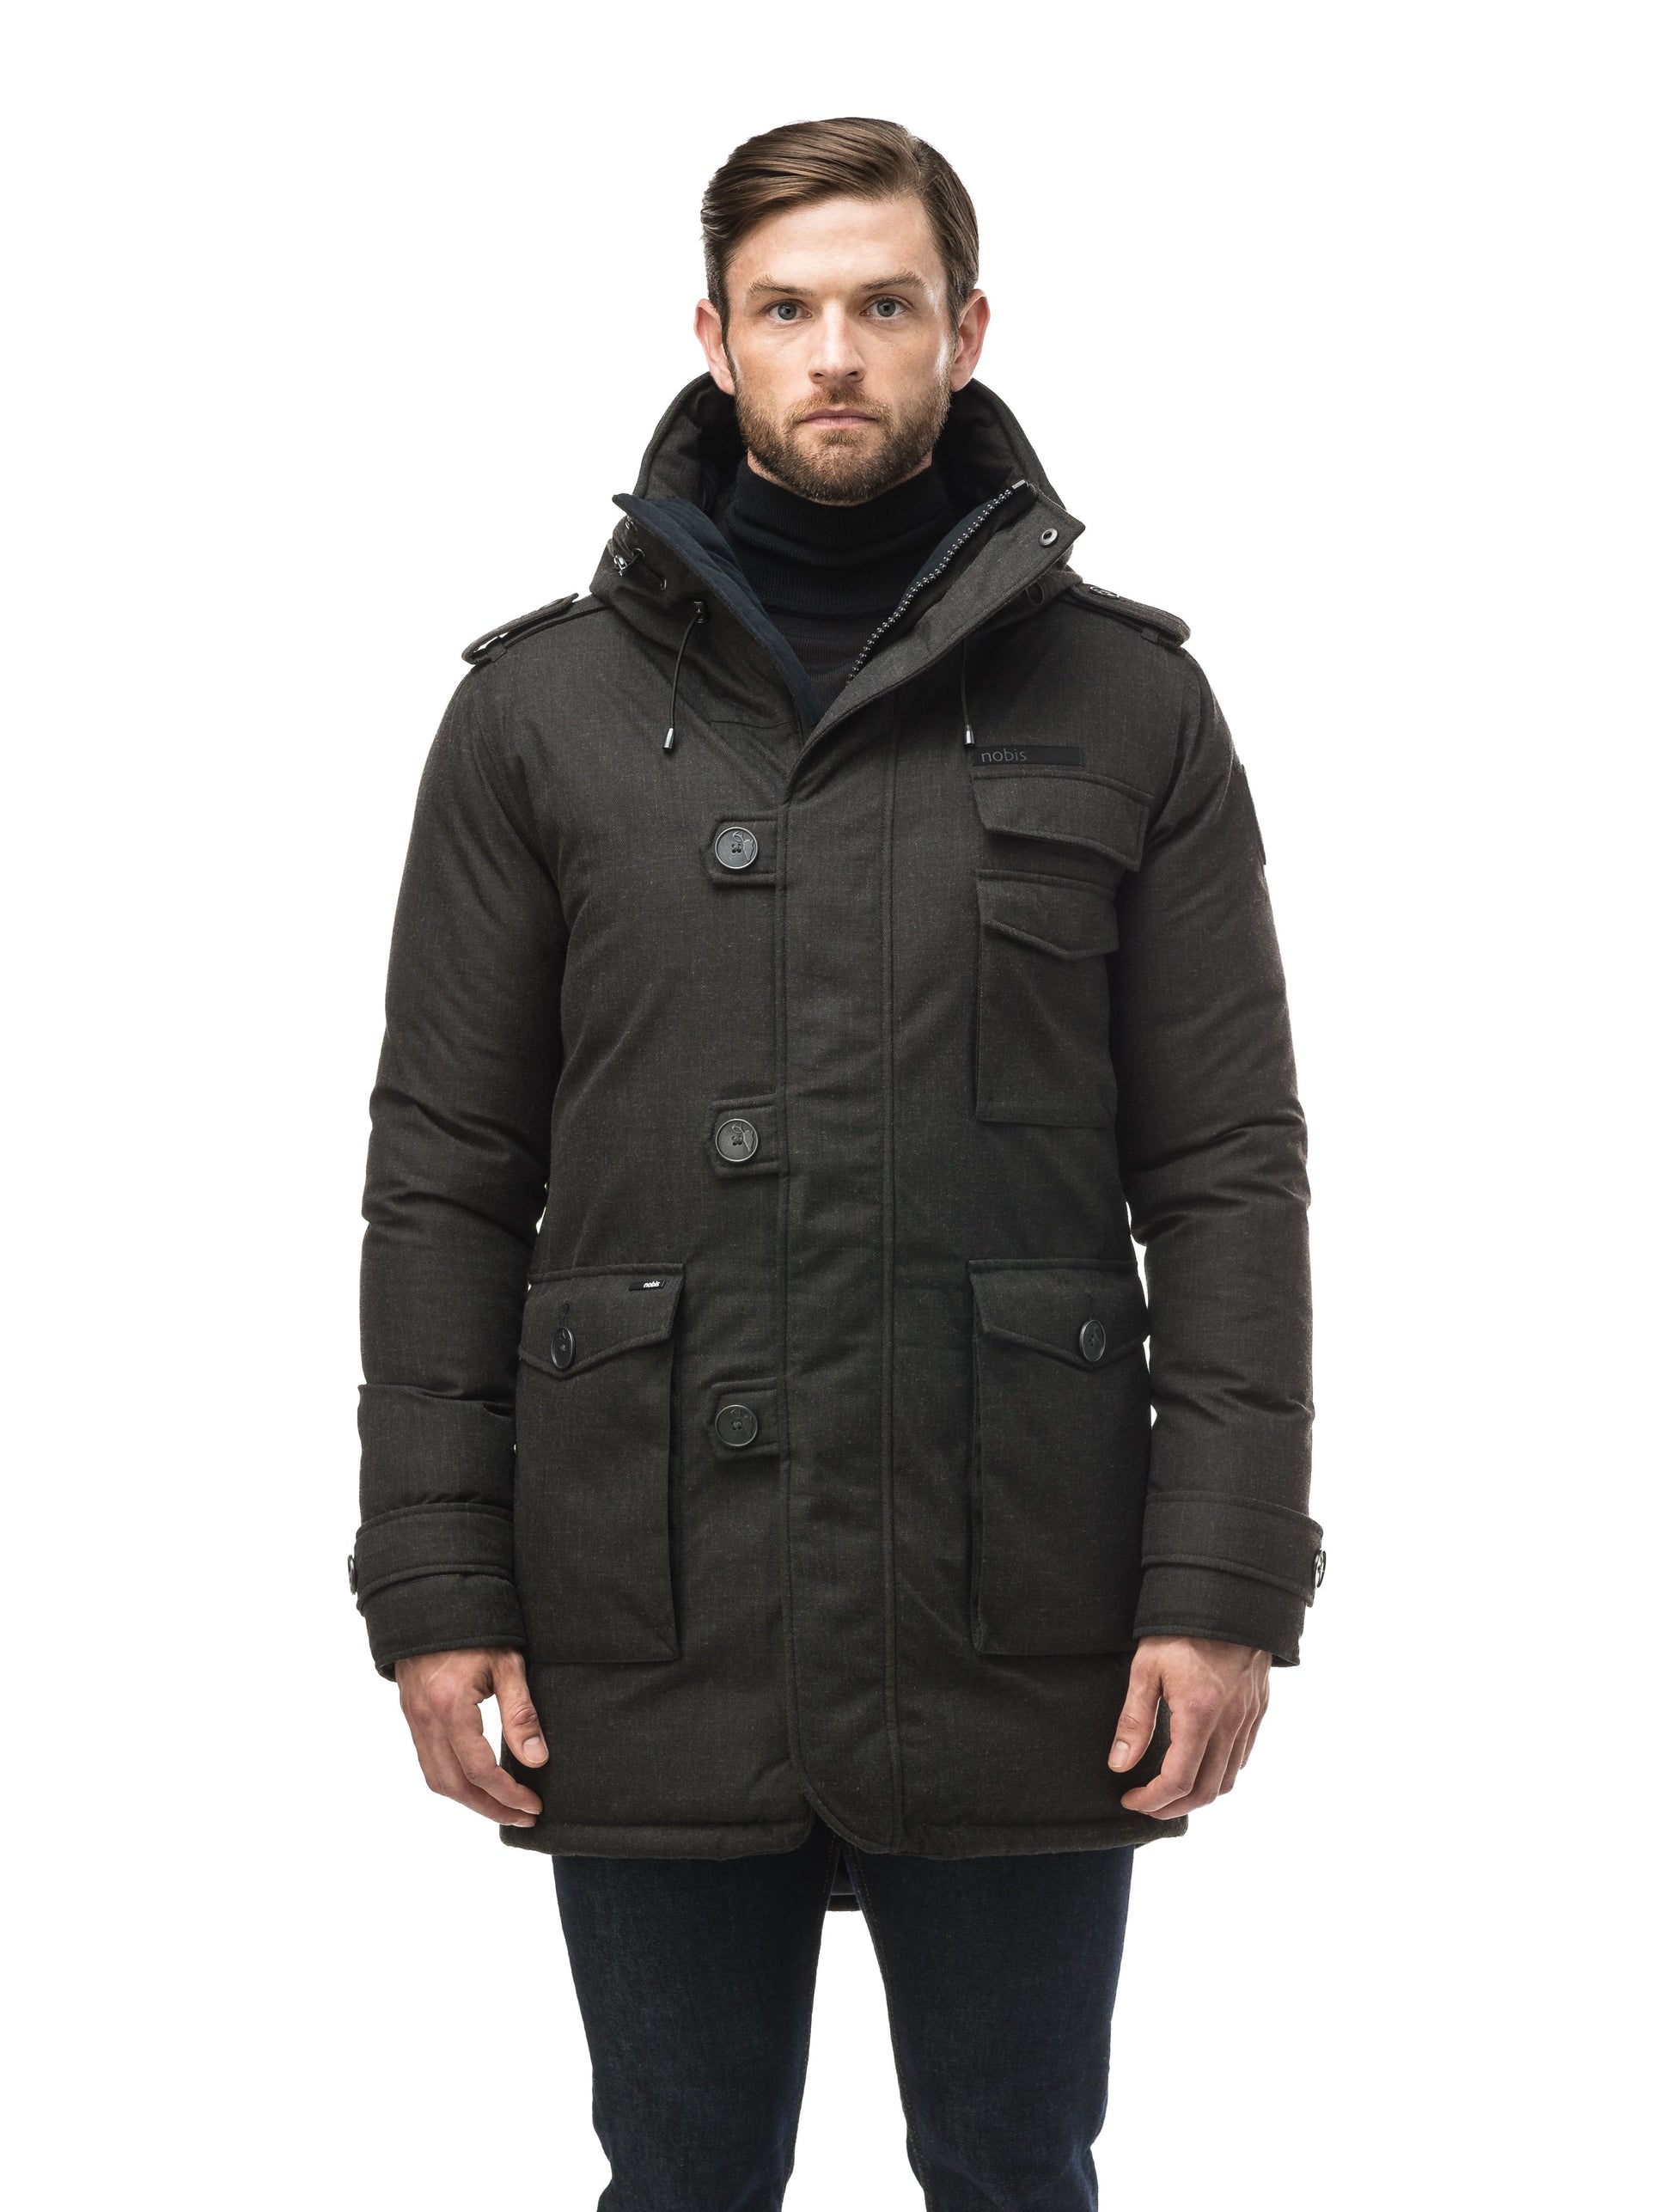 Men's Down Puffer Jacket with Faux Fur Hood and Chest Pocket